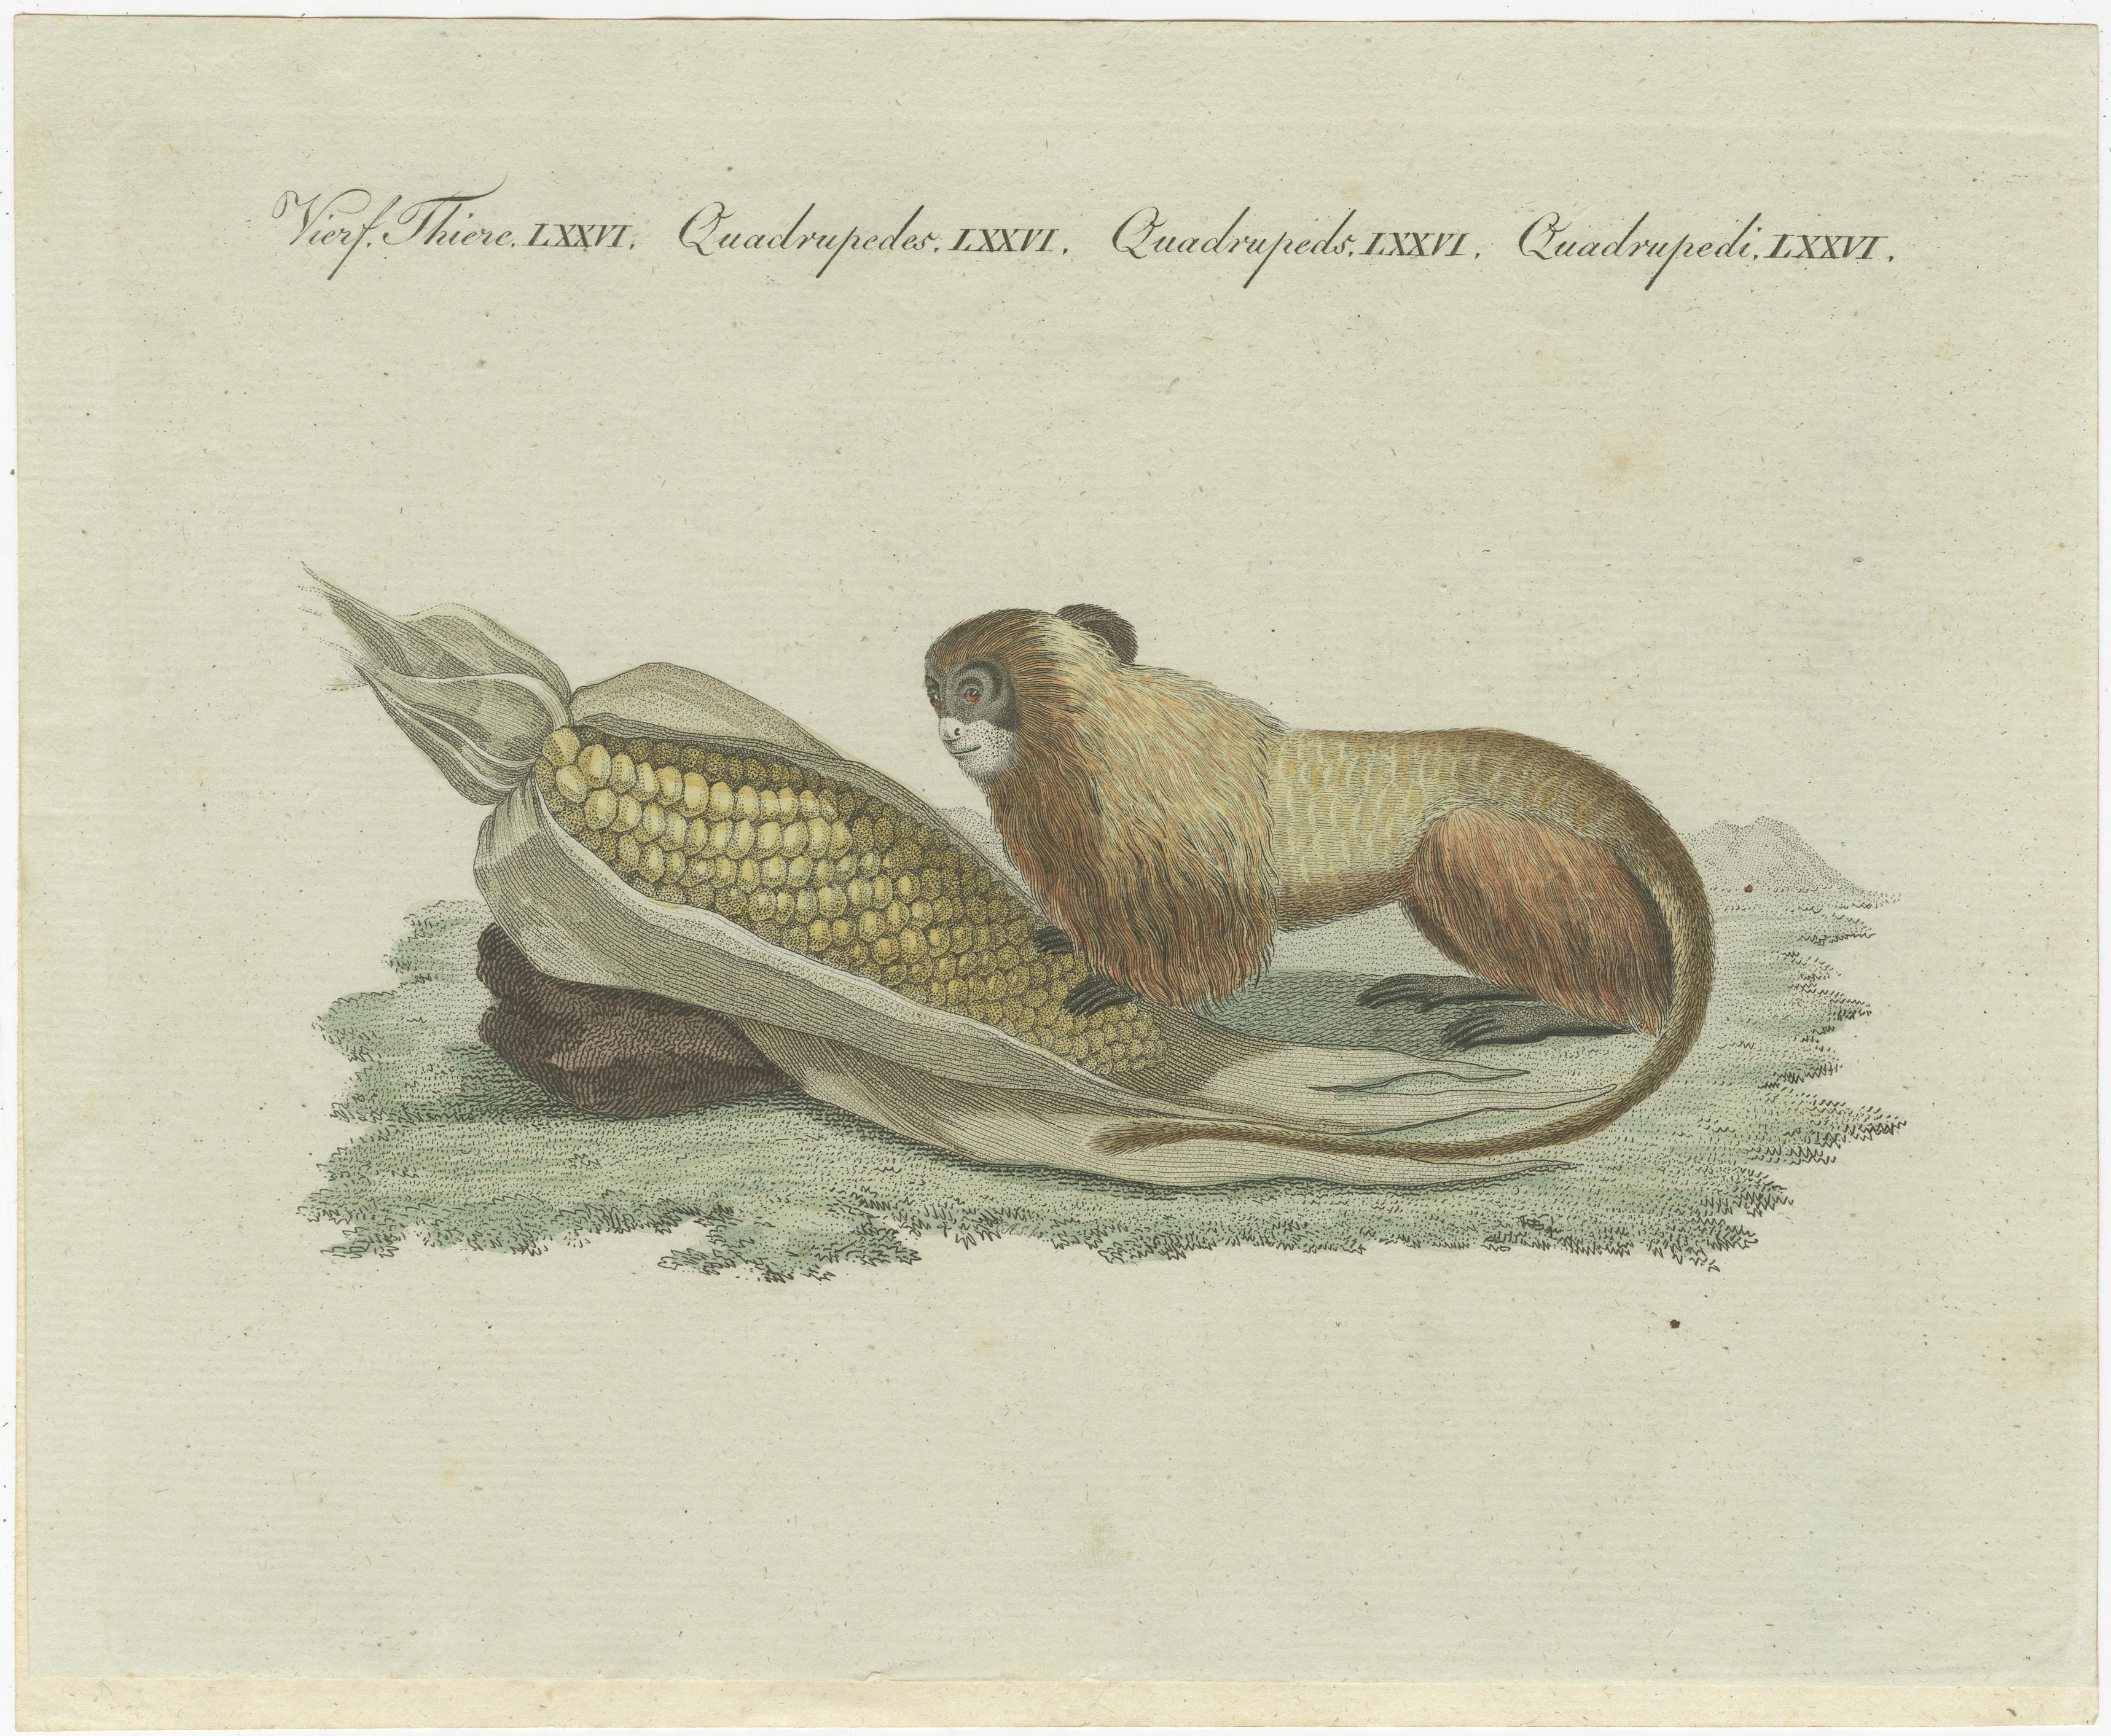 Original antique print of lion tamarin monkey eating corn. This print originates from 'Bilderbuch fur Kinder' by F.J. Bertuch. Friedrich Johann Bertuch (1747-1822) was a German publisher and man of arts most famous for his 12-volume encyclopedia for